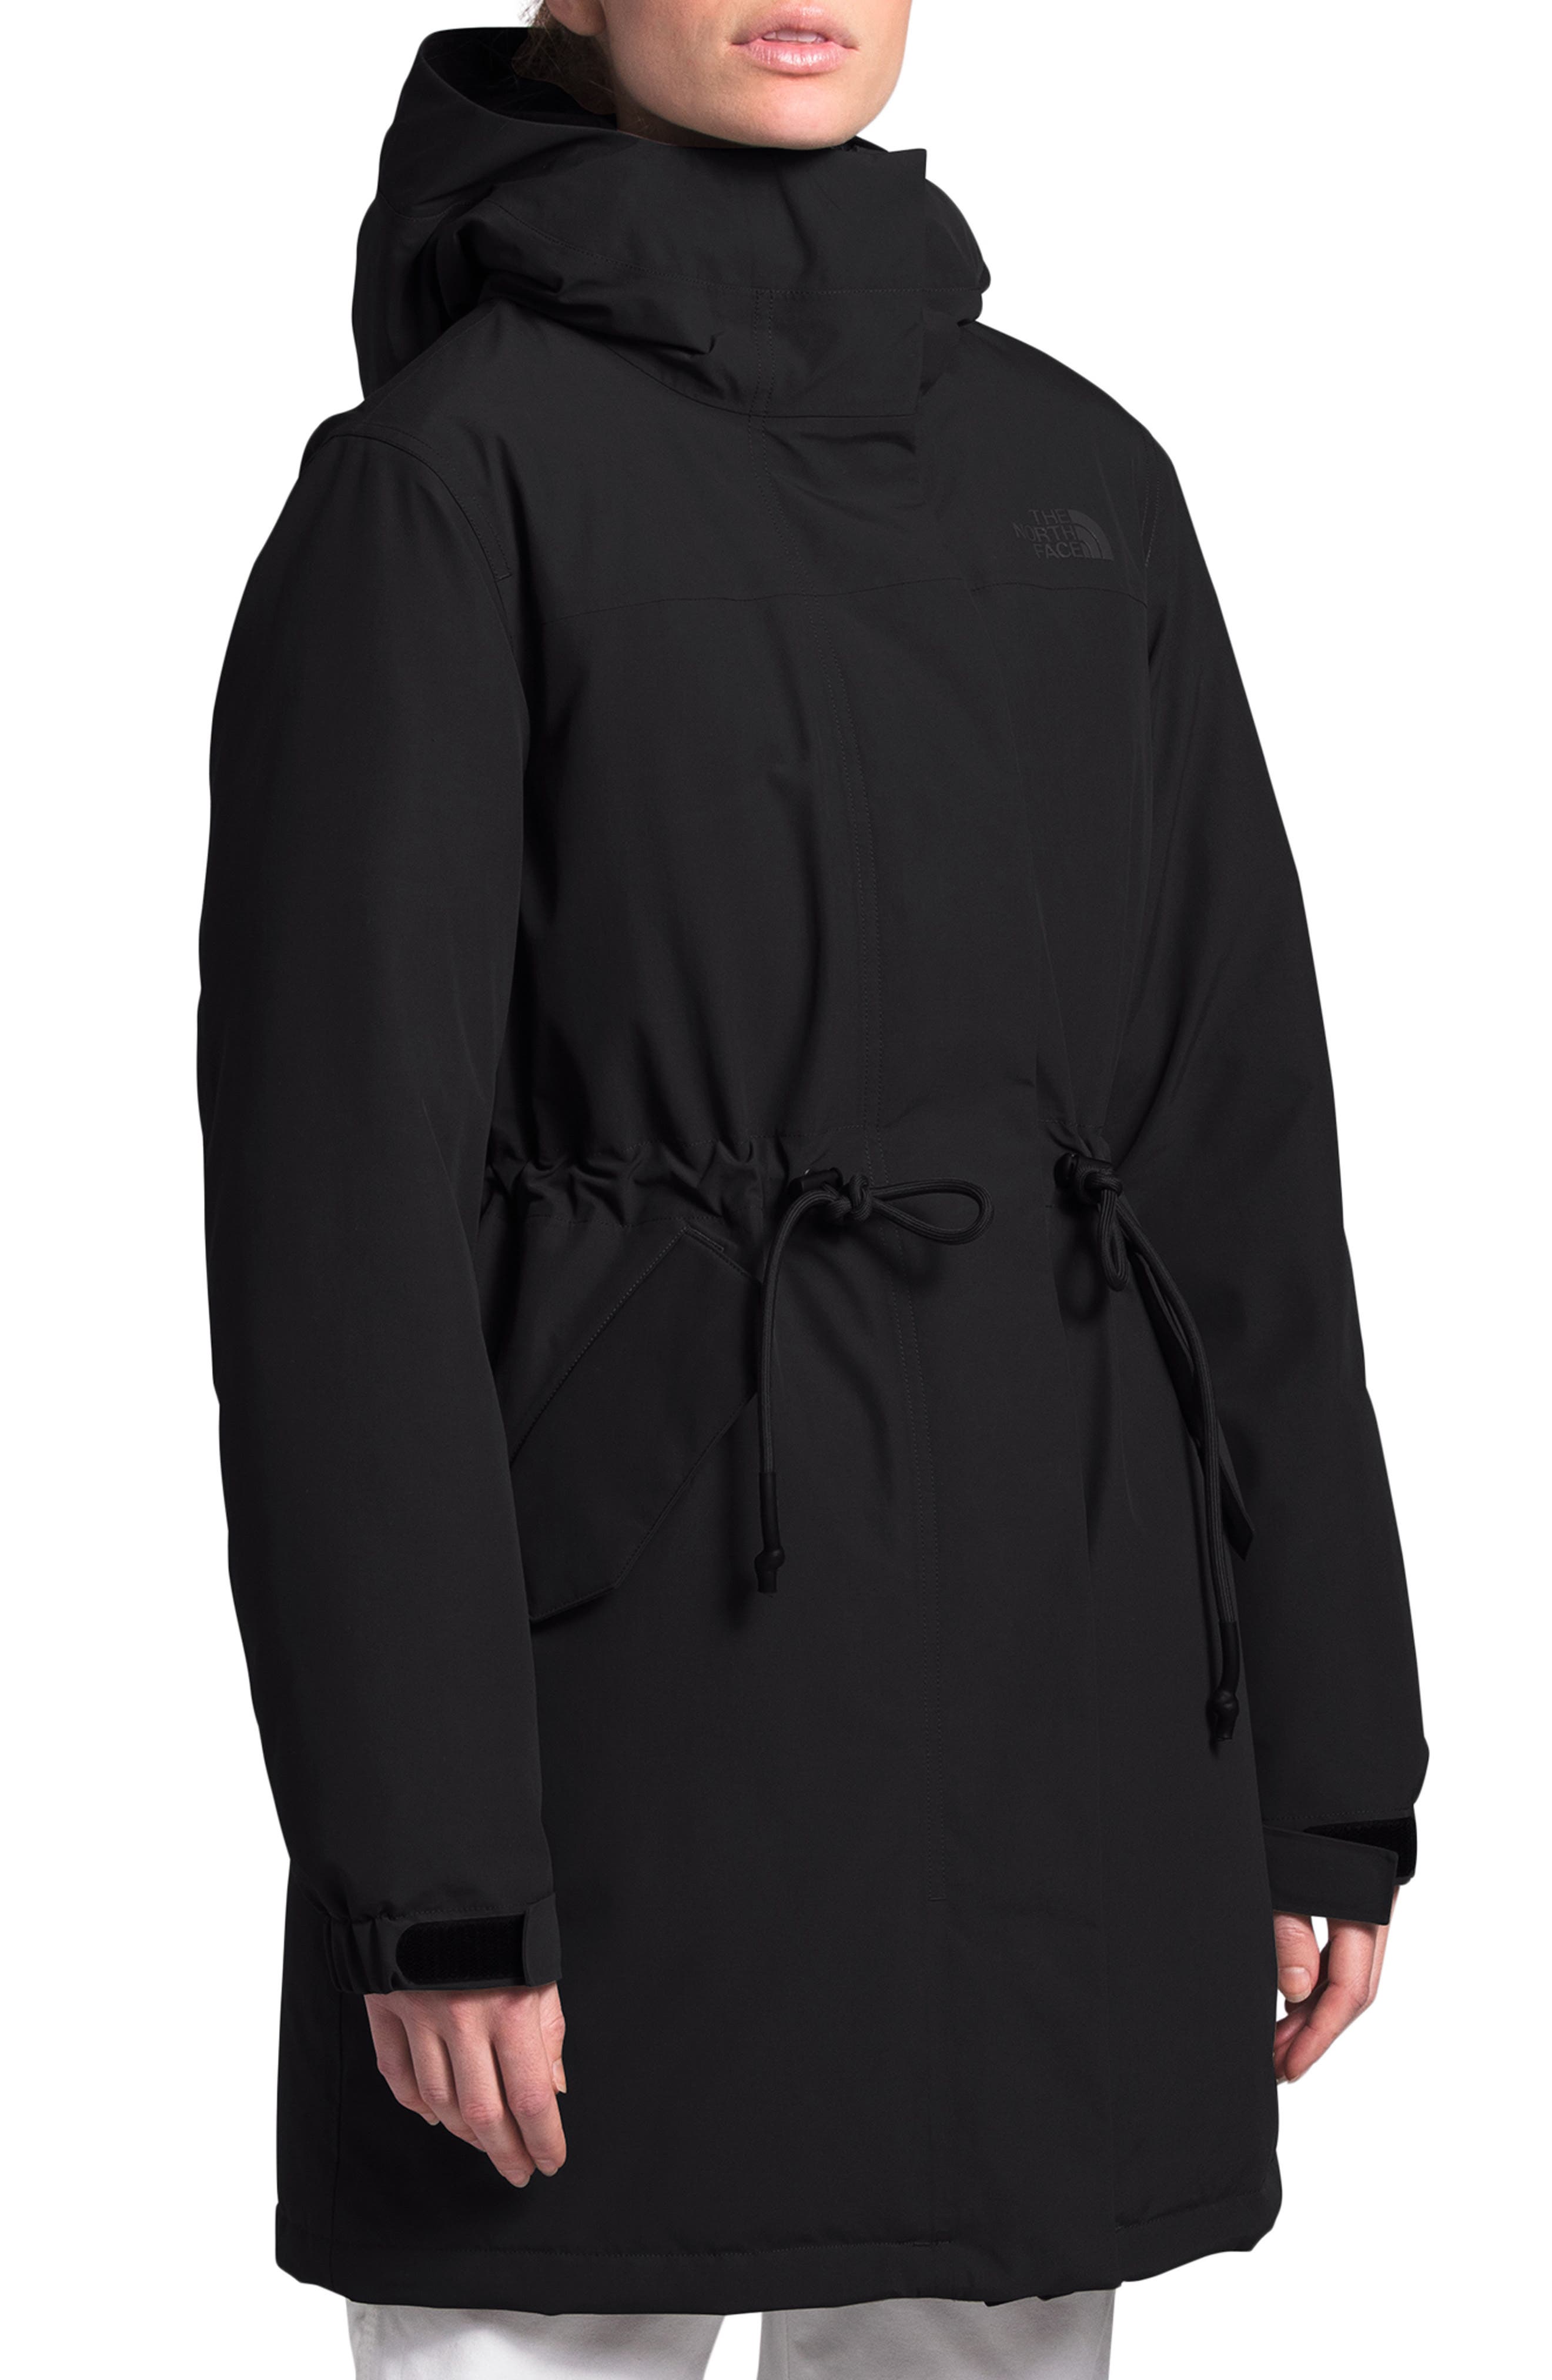 north face water repellent jacket